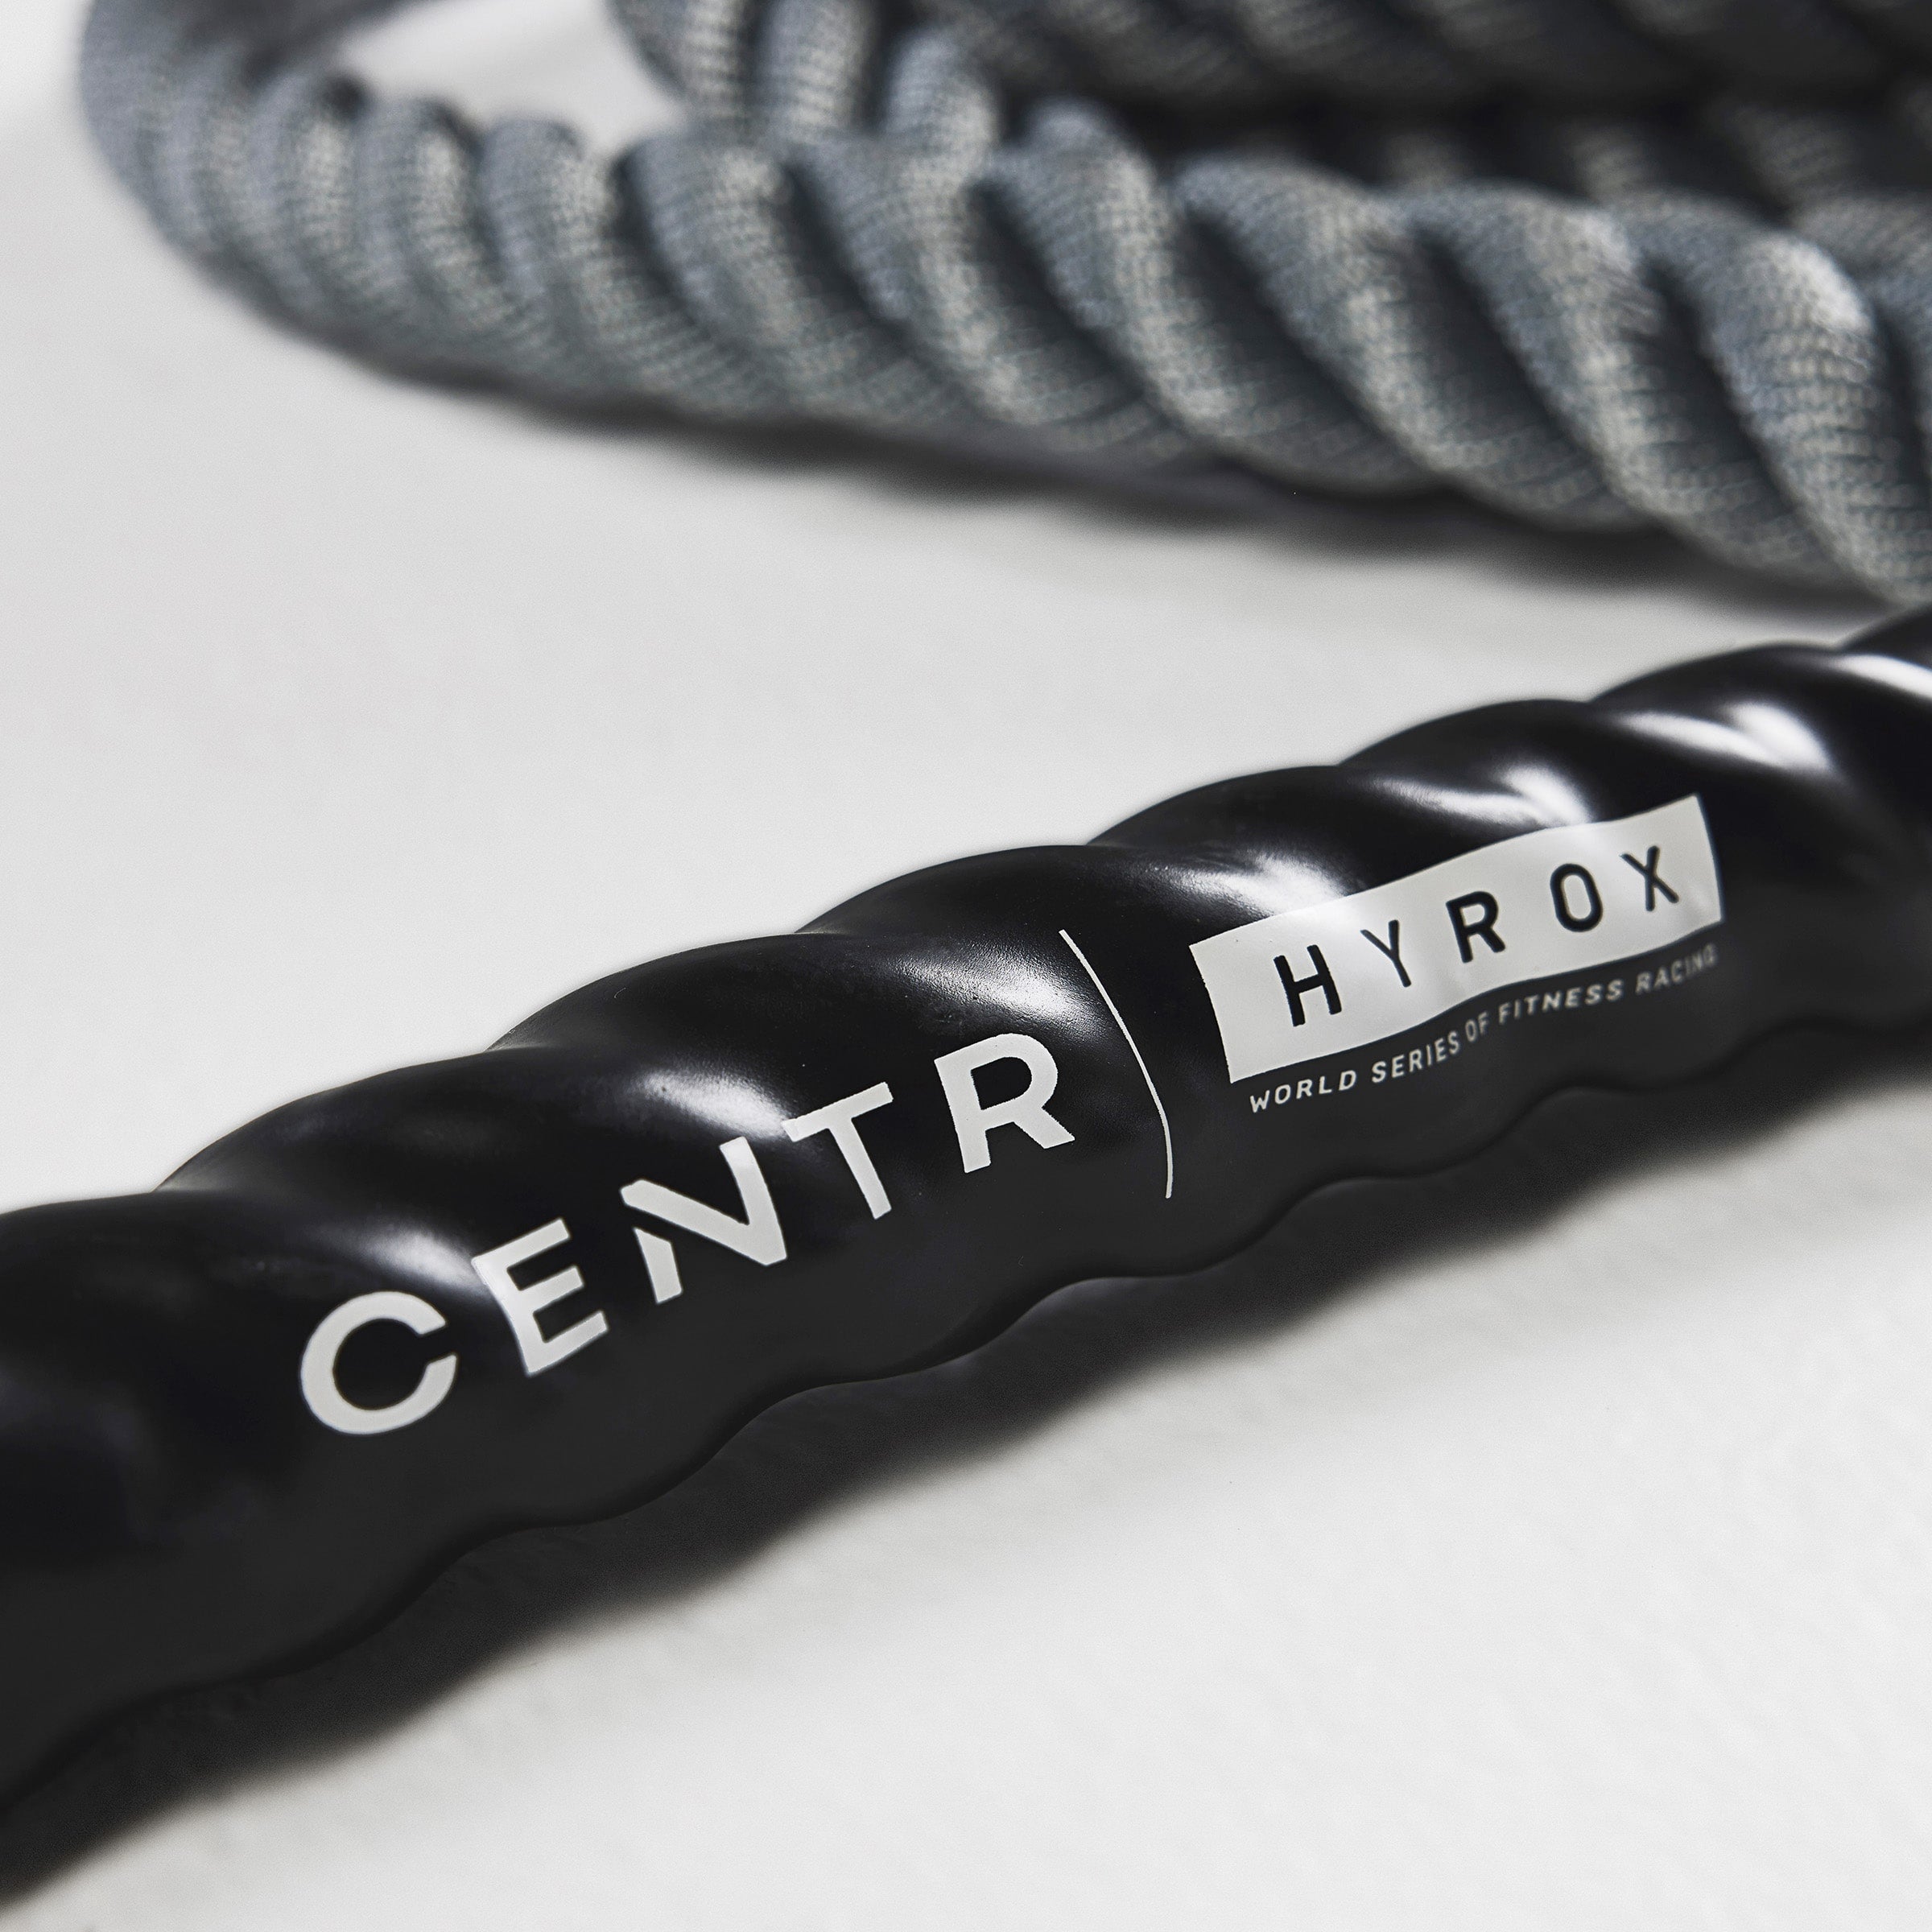 CENTR x HYROX Competition Power Rope (SHIPPING EARLY MAY)